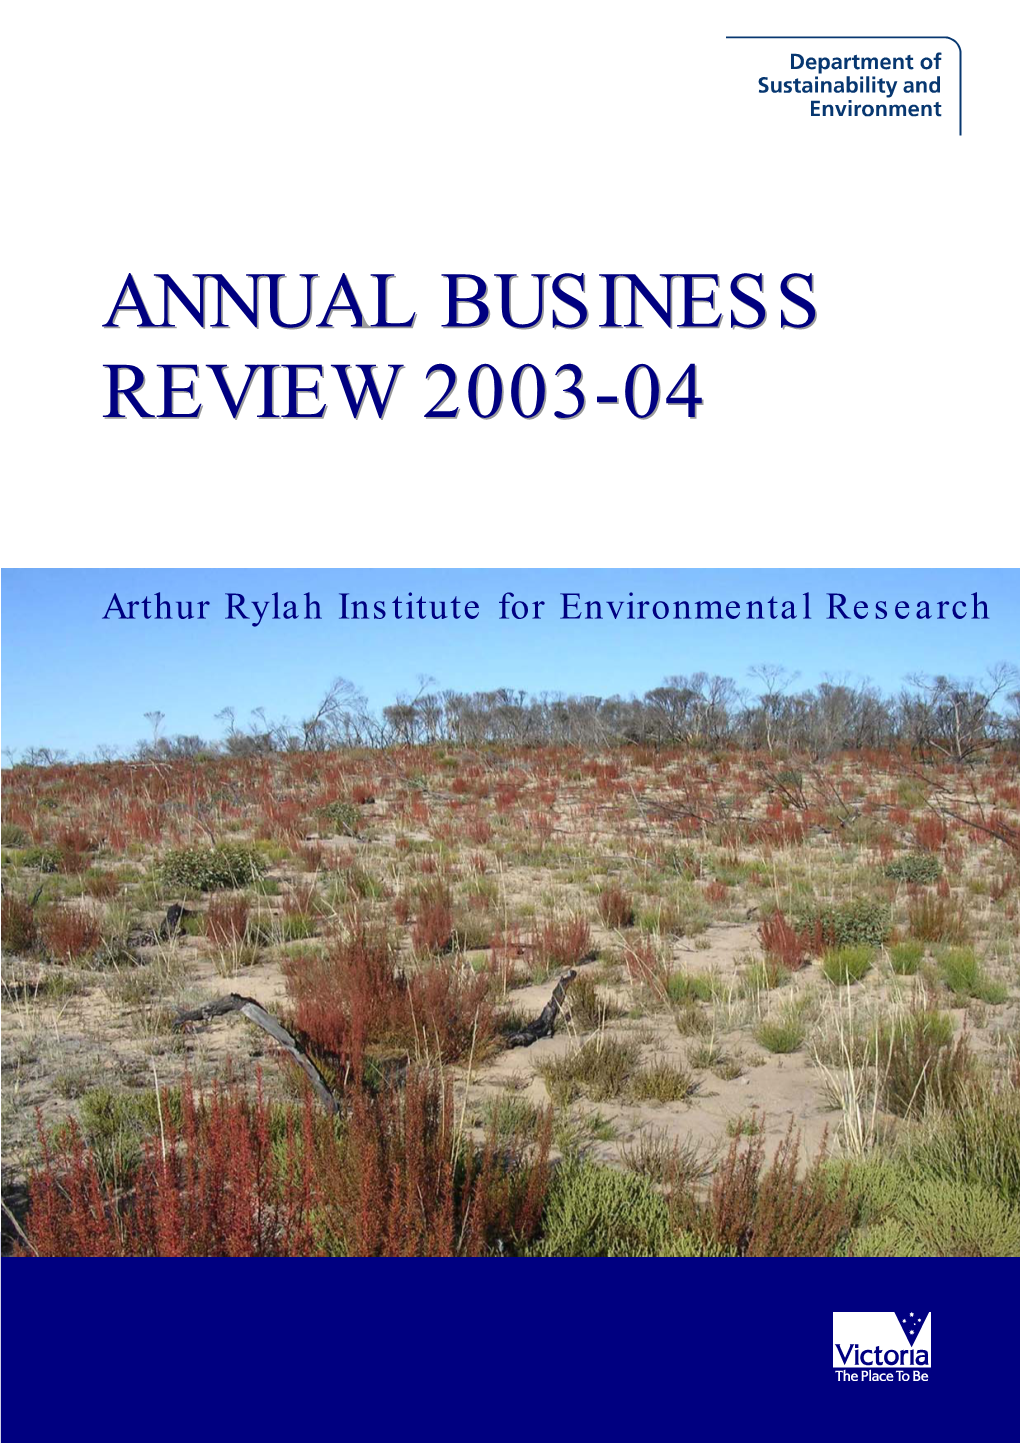 Annual Business Review 2003-04 Arthur Rylah Institute for Environmental Research